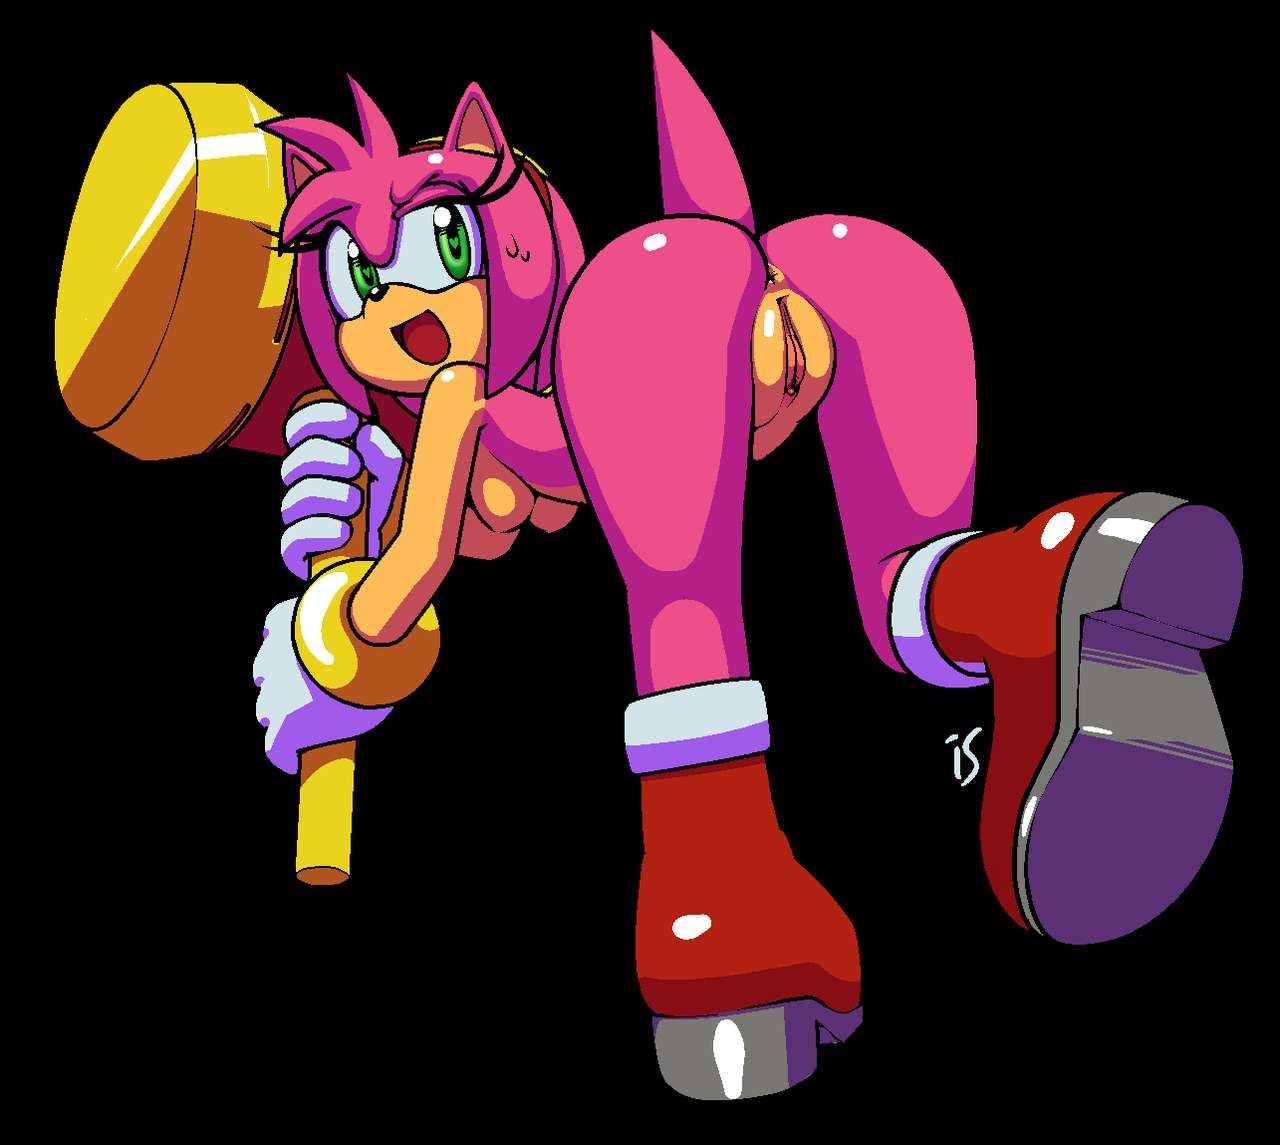 Amy Rose Collection - Hotred/isadultart 20